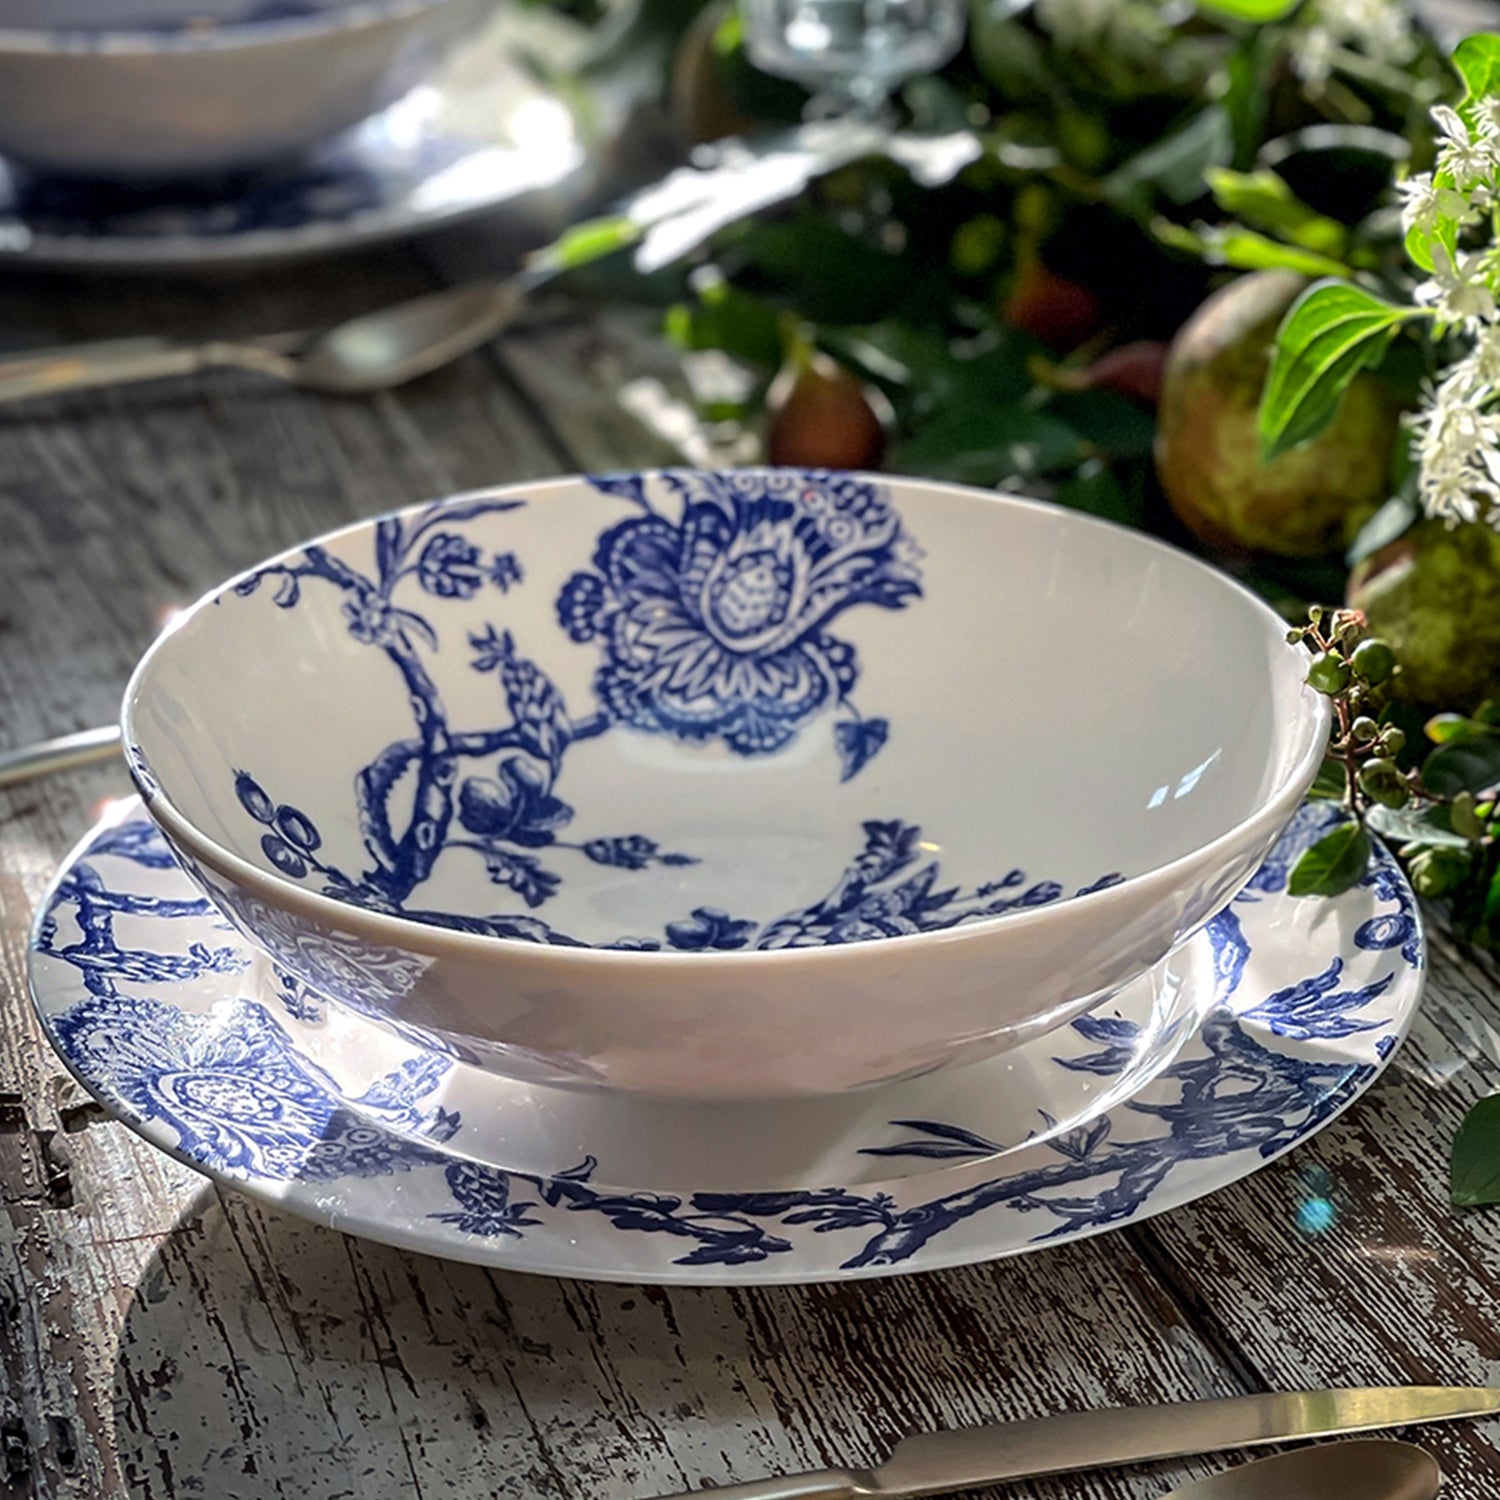 Blue and White Arcadia Pattern Soup Bowl and Dinner Plate in high-fired porcelain from Caskata.